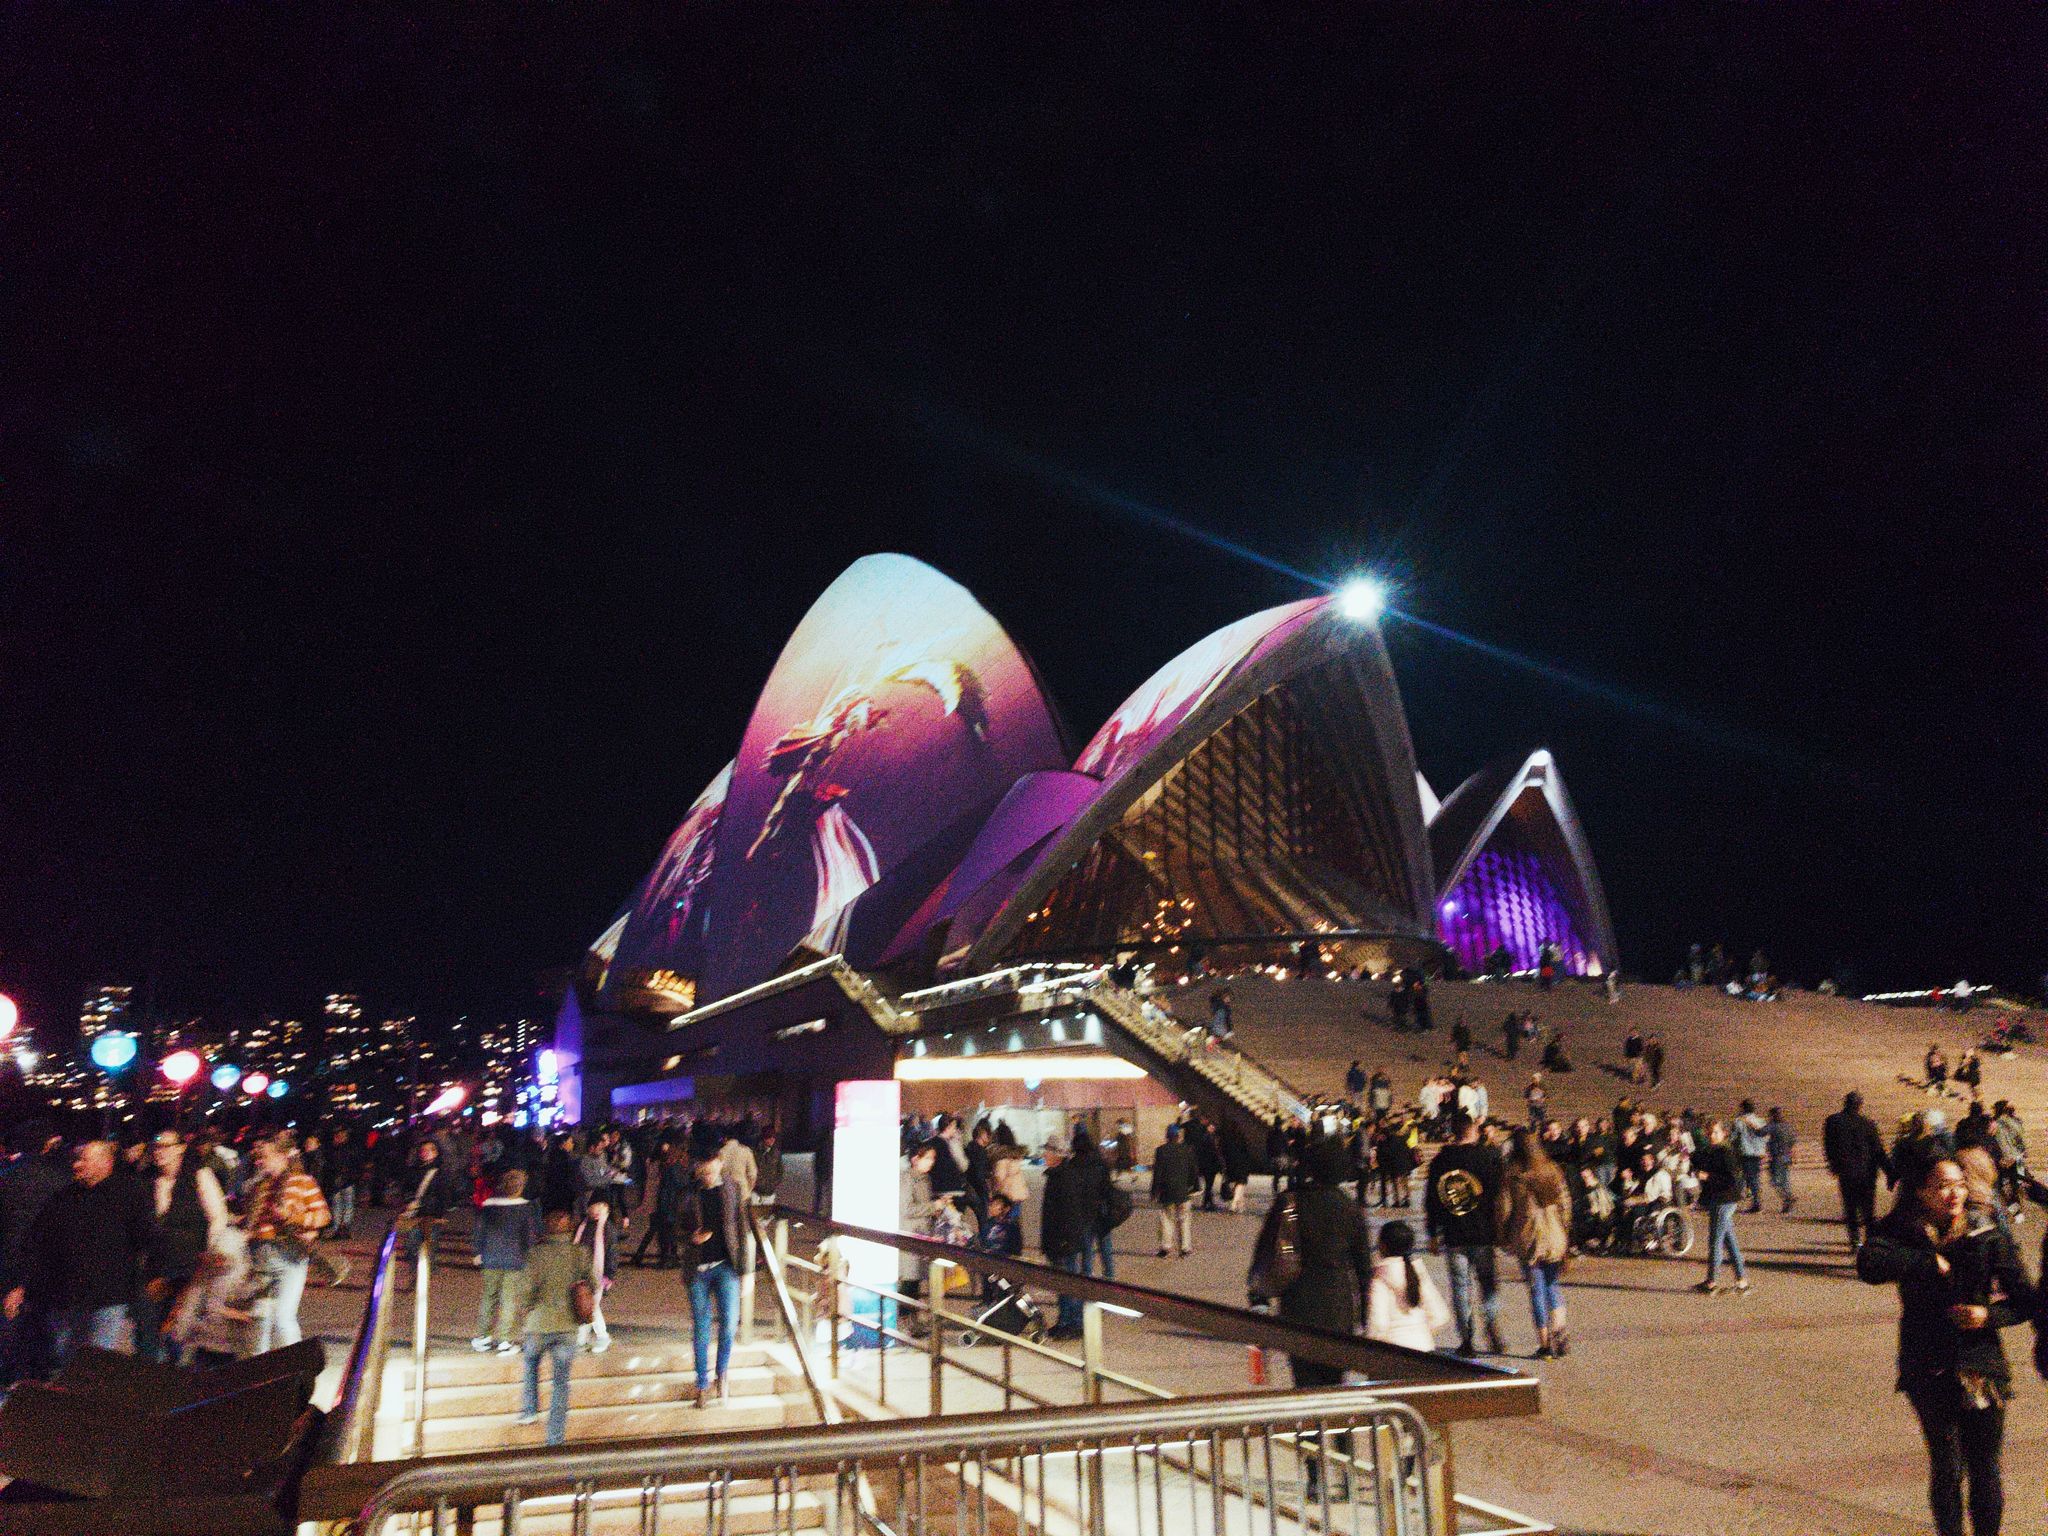 A view of the Sydney Opera House with a purple design being projected onto it.